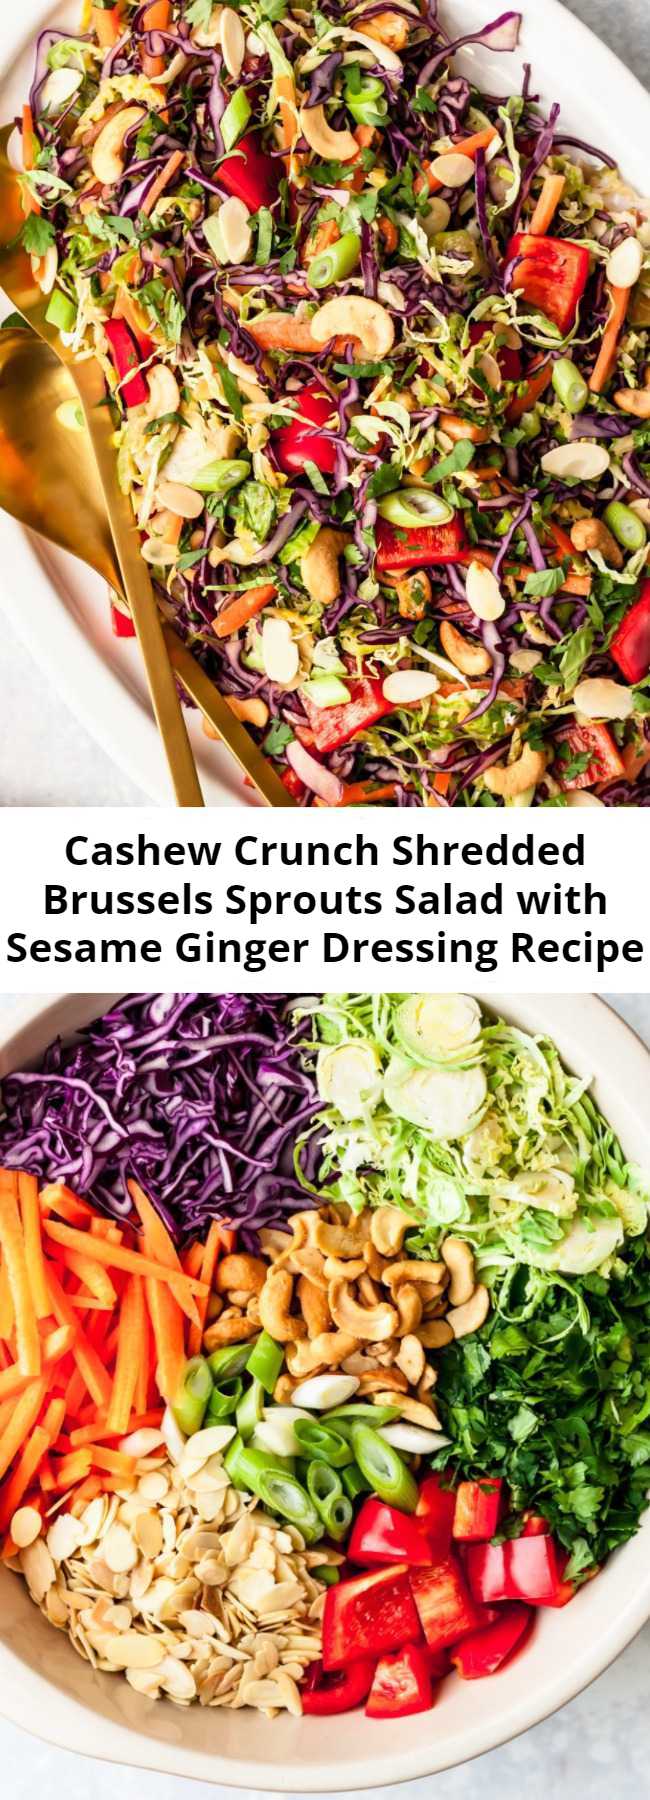 Cashew Crunch Shredded Brussels Sprouts Salad with Sesame Ginger Dressing Recipe - Delicious cashew crunch shredded brussels sprouts salad tossed in a flavorful sesame ginger dressing. This easy vegan salad recipe is loaded with colorful veggies and topped with roasted cashews and almonds. Great for meal prep, parties and potlucks! #saladrecipe #vegetarian #mealprep #potluck